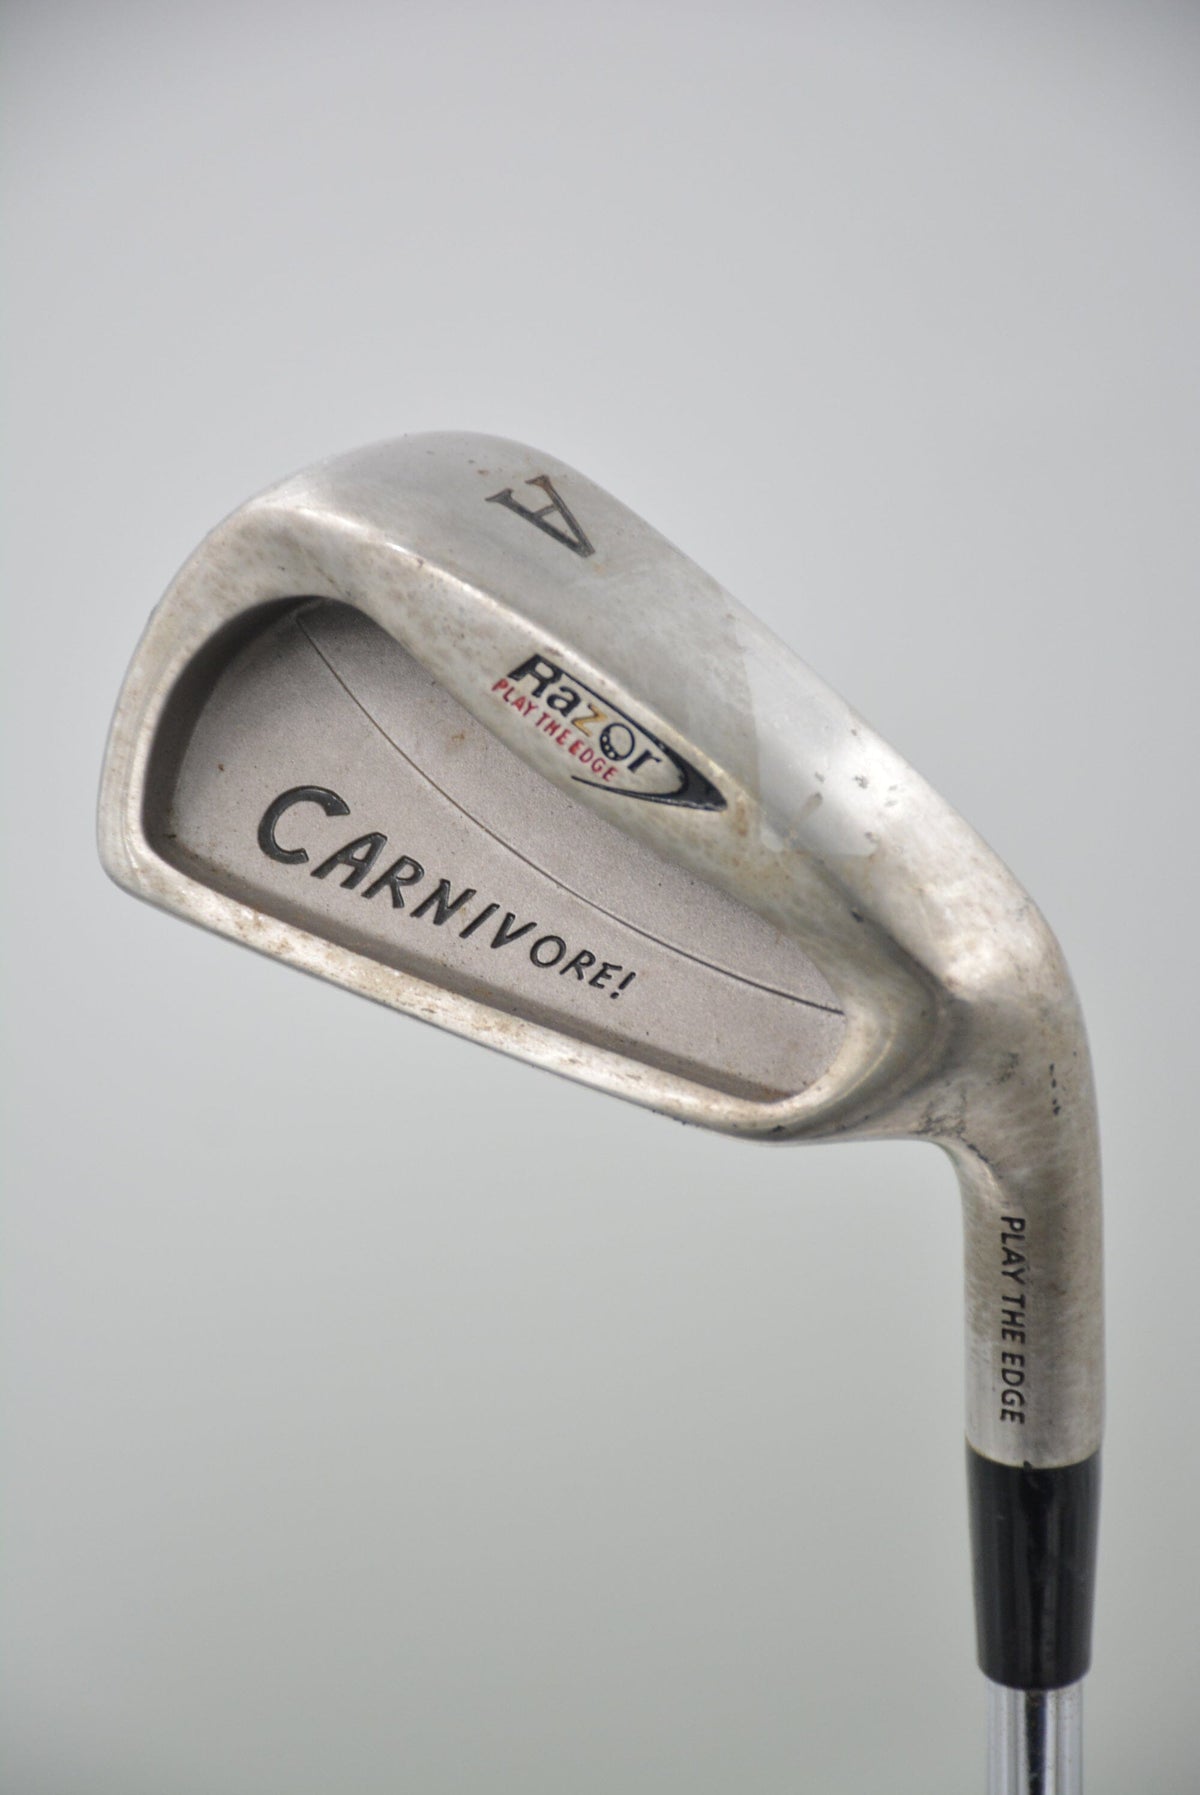 Razor Carnivore! AW Wedge S Flex Golf Clubs GolfRoots 